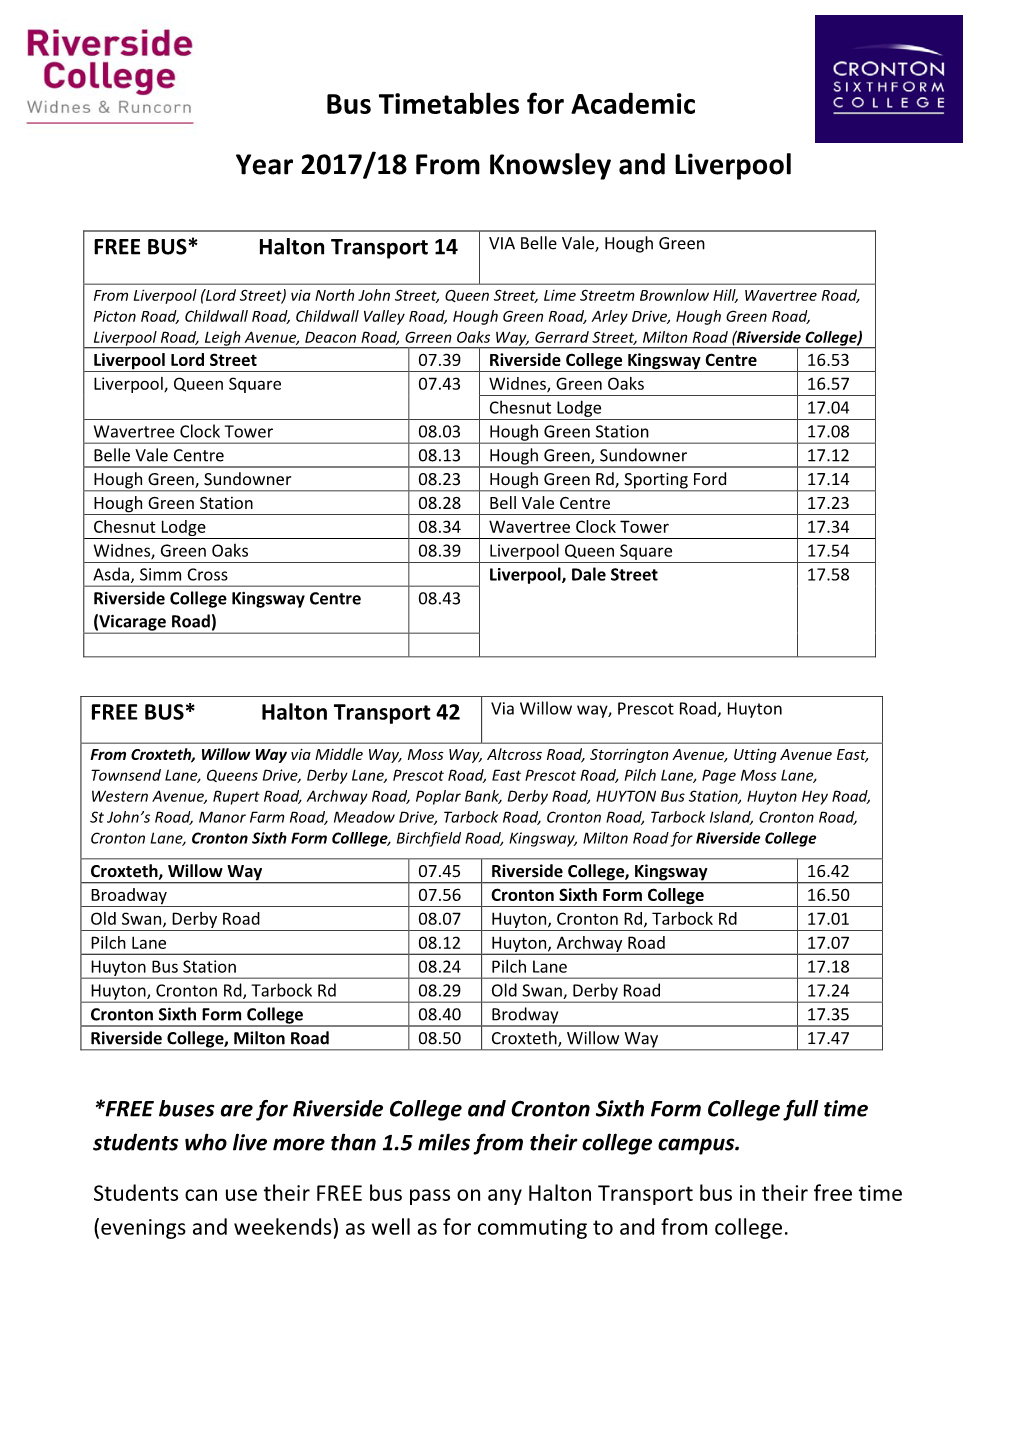 Bus Timetables for Academic Year 2017/18 from Knowsley and Liverpool